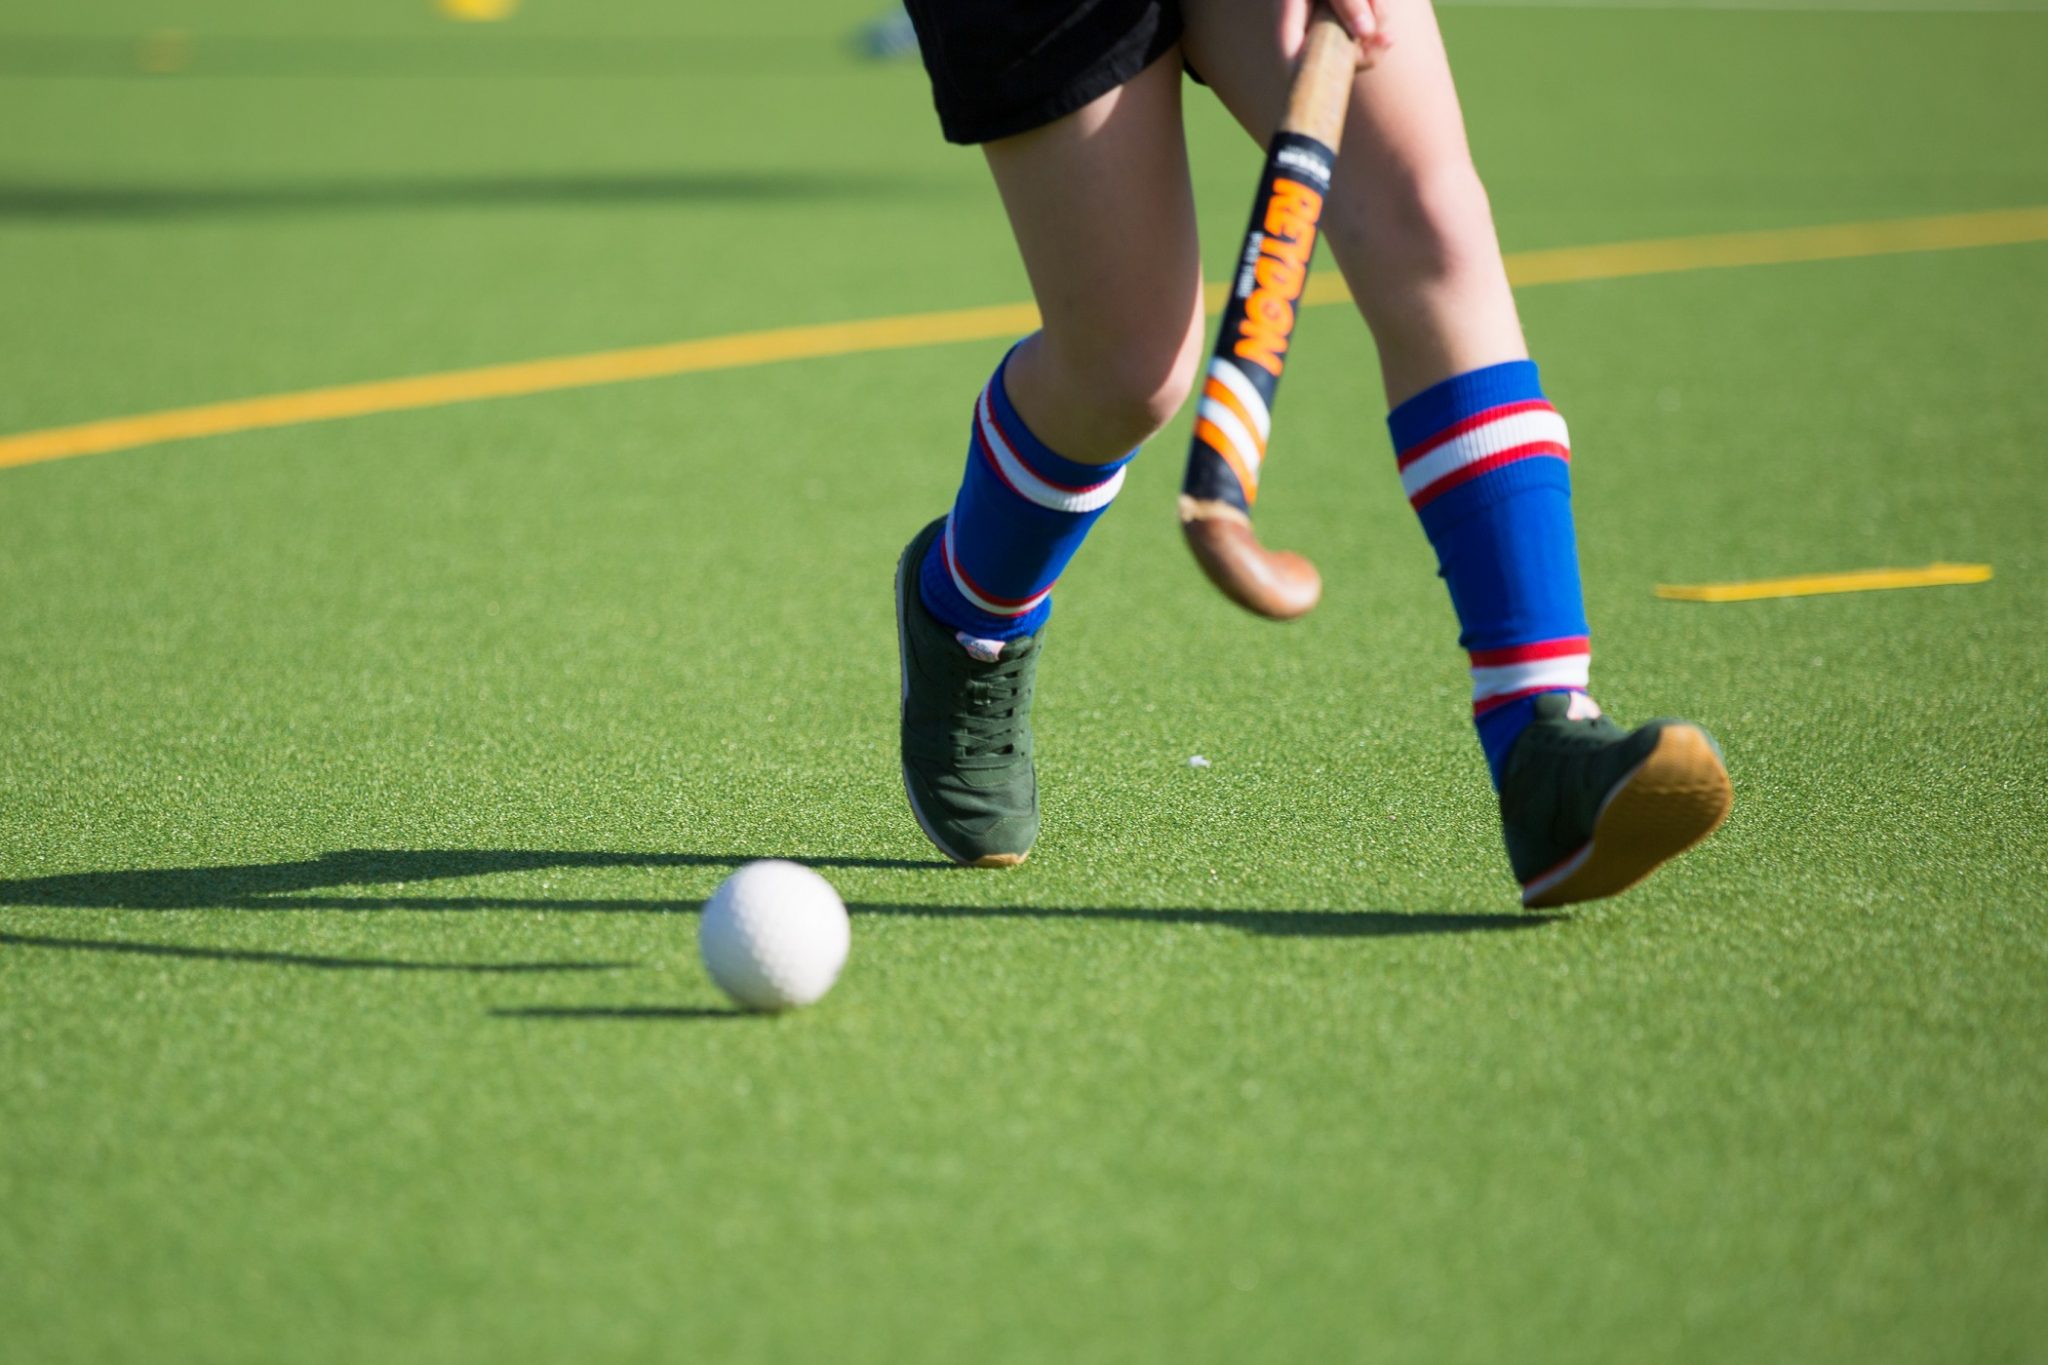 A guide to all astroturf pitches: 2G, 3G, 4G and beyond